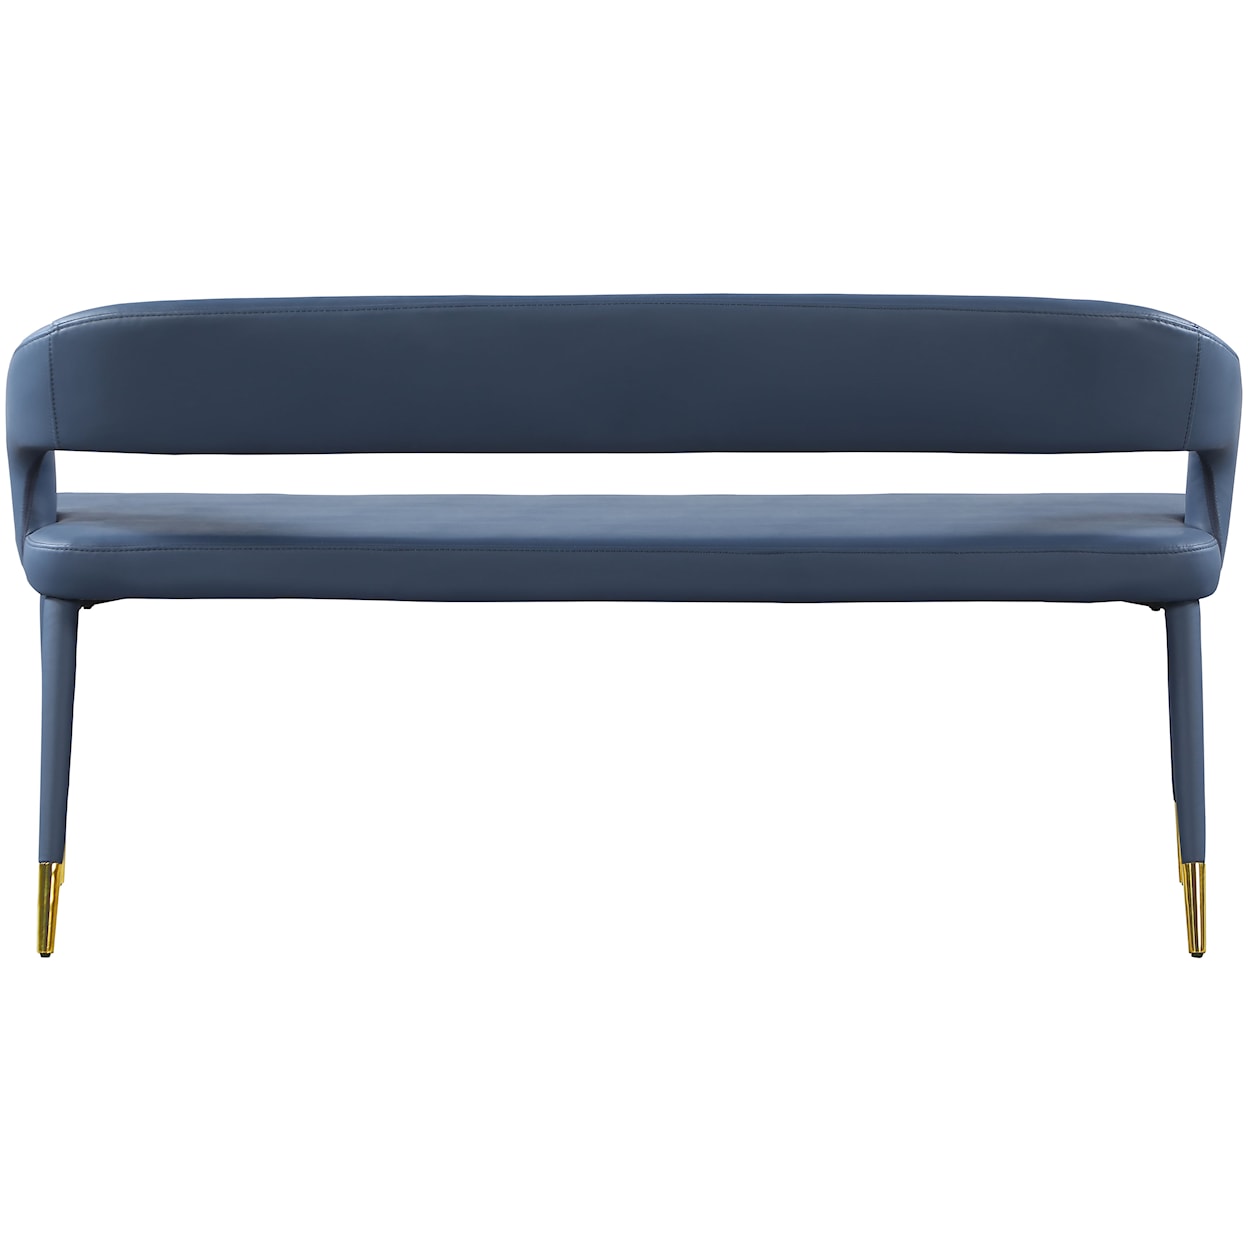 Meridian Furniture Destiny Upholstered Navy Faux Leather Bench